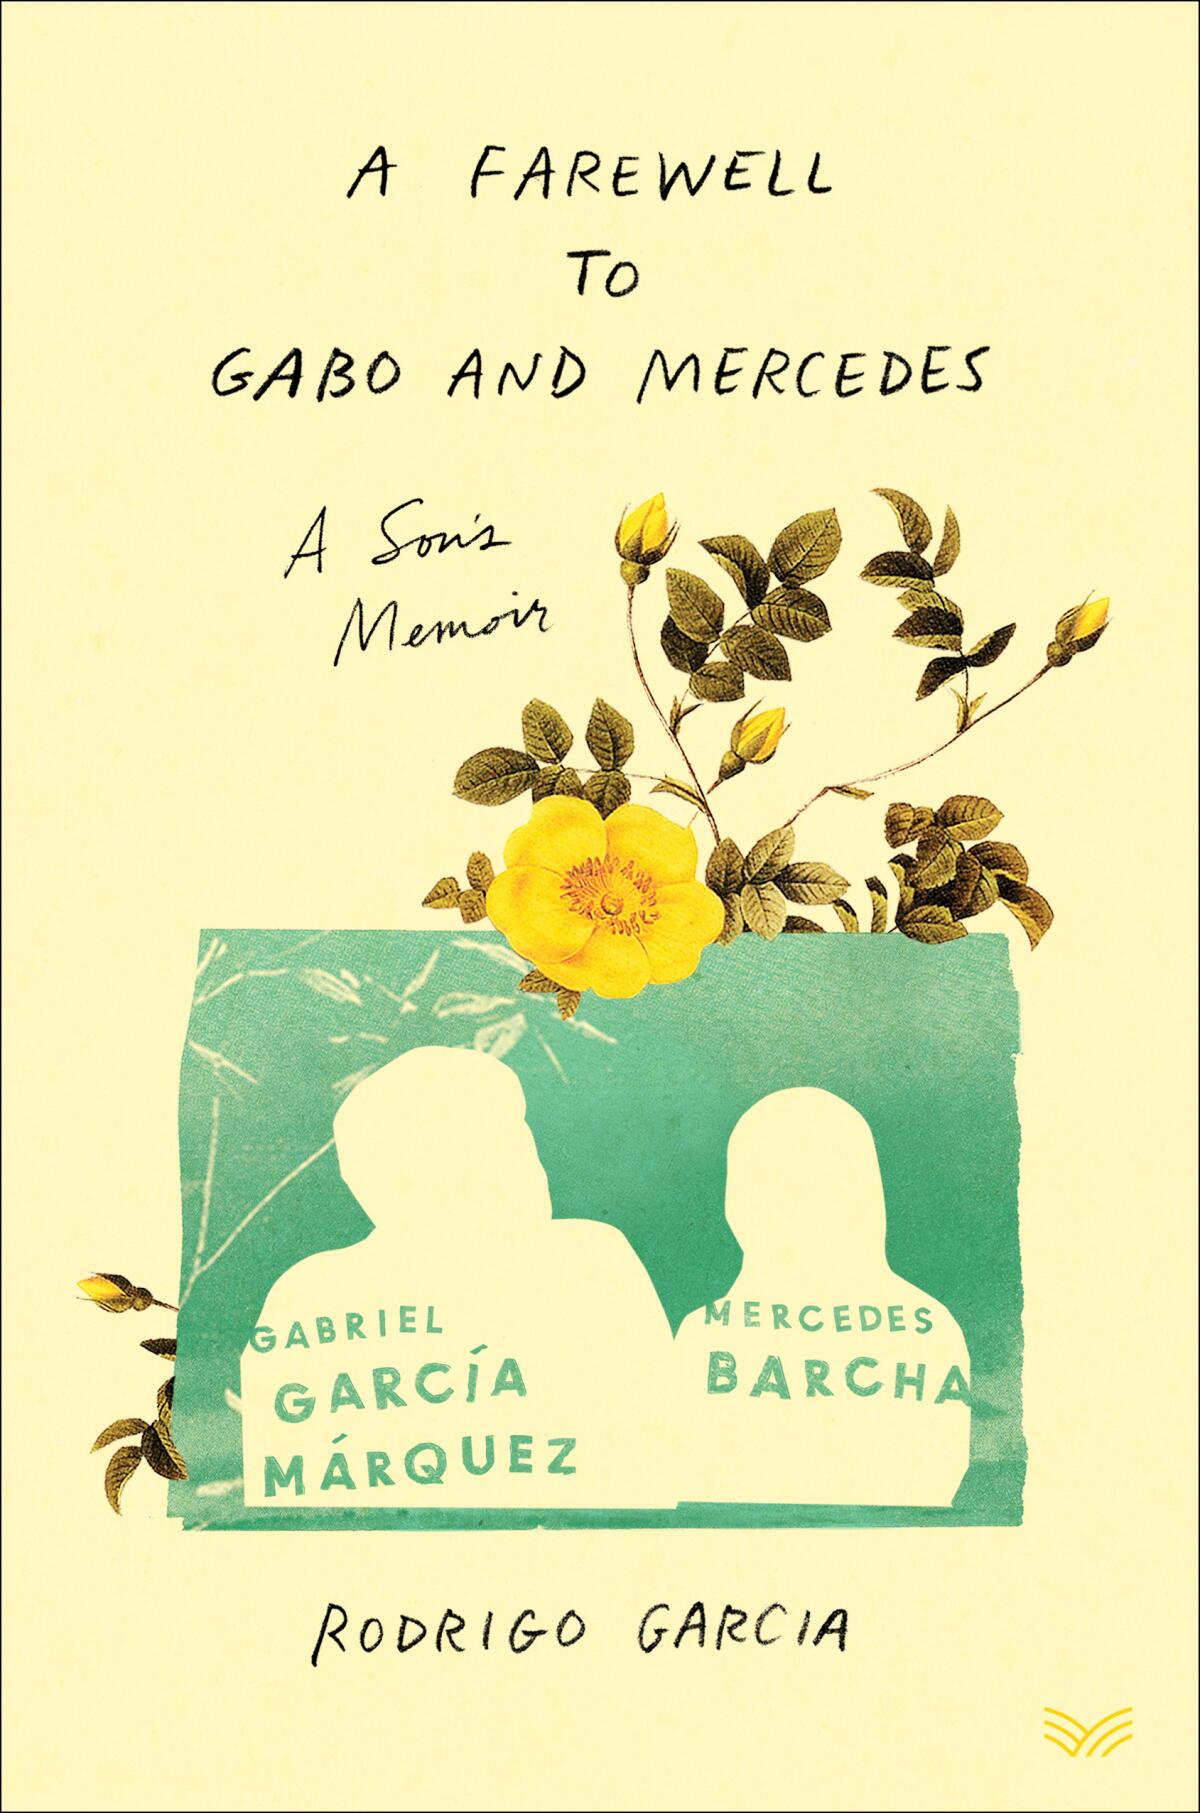 A cream-colored book cover features yellow flowers and the outlines of a man and a woman against a blue rectangle